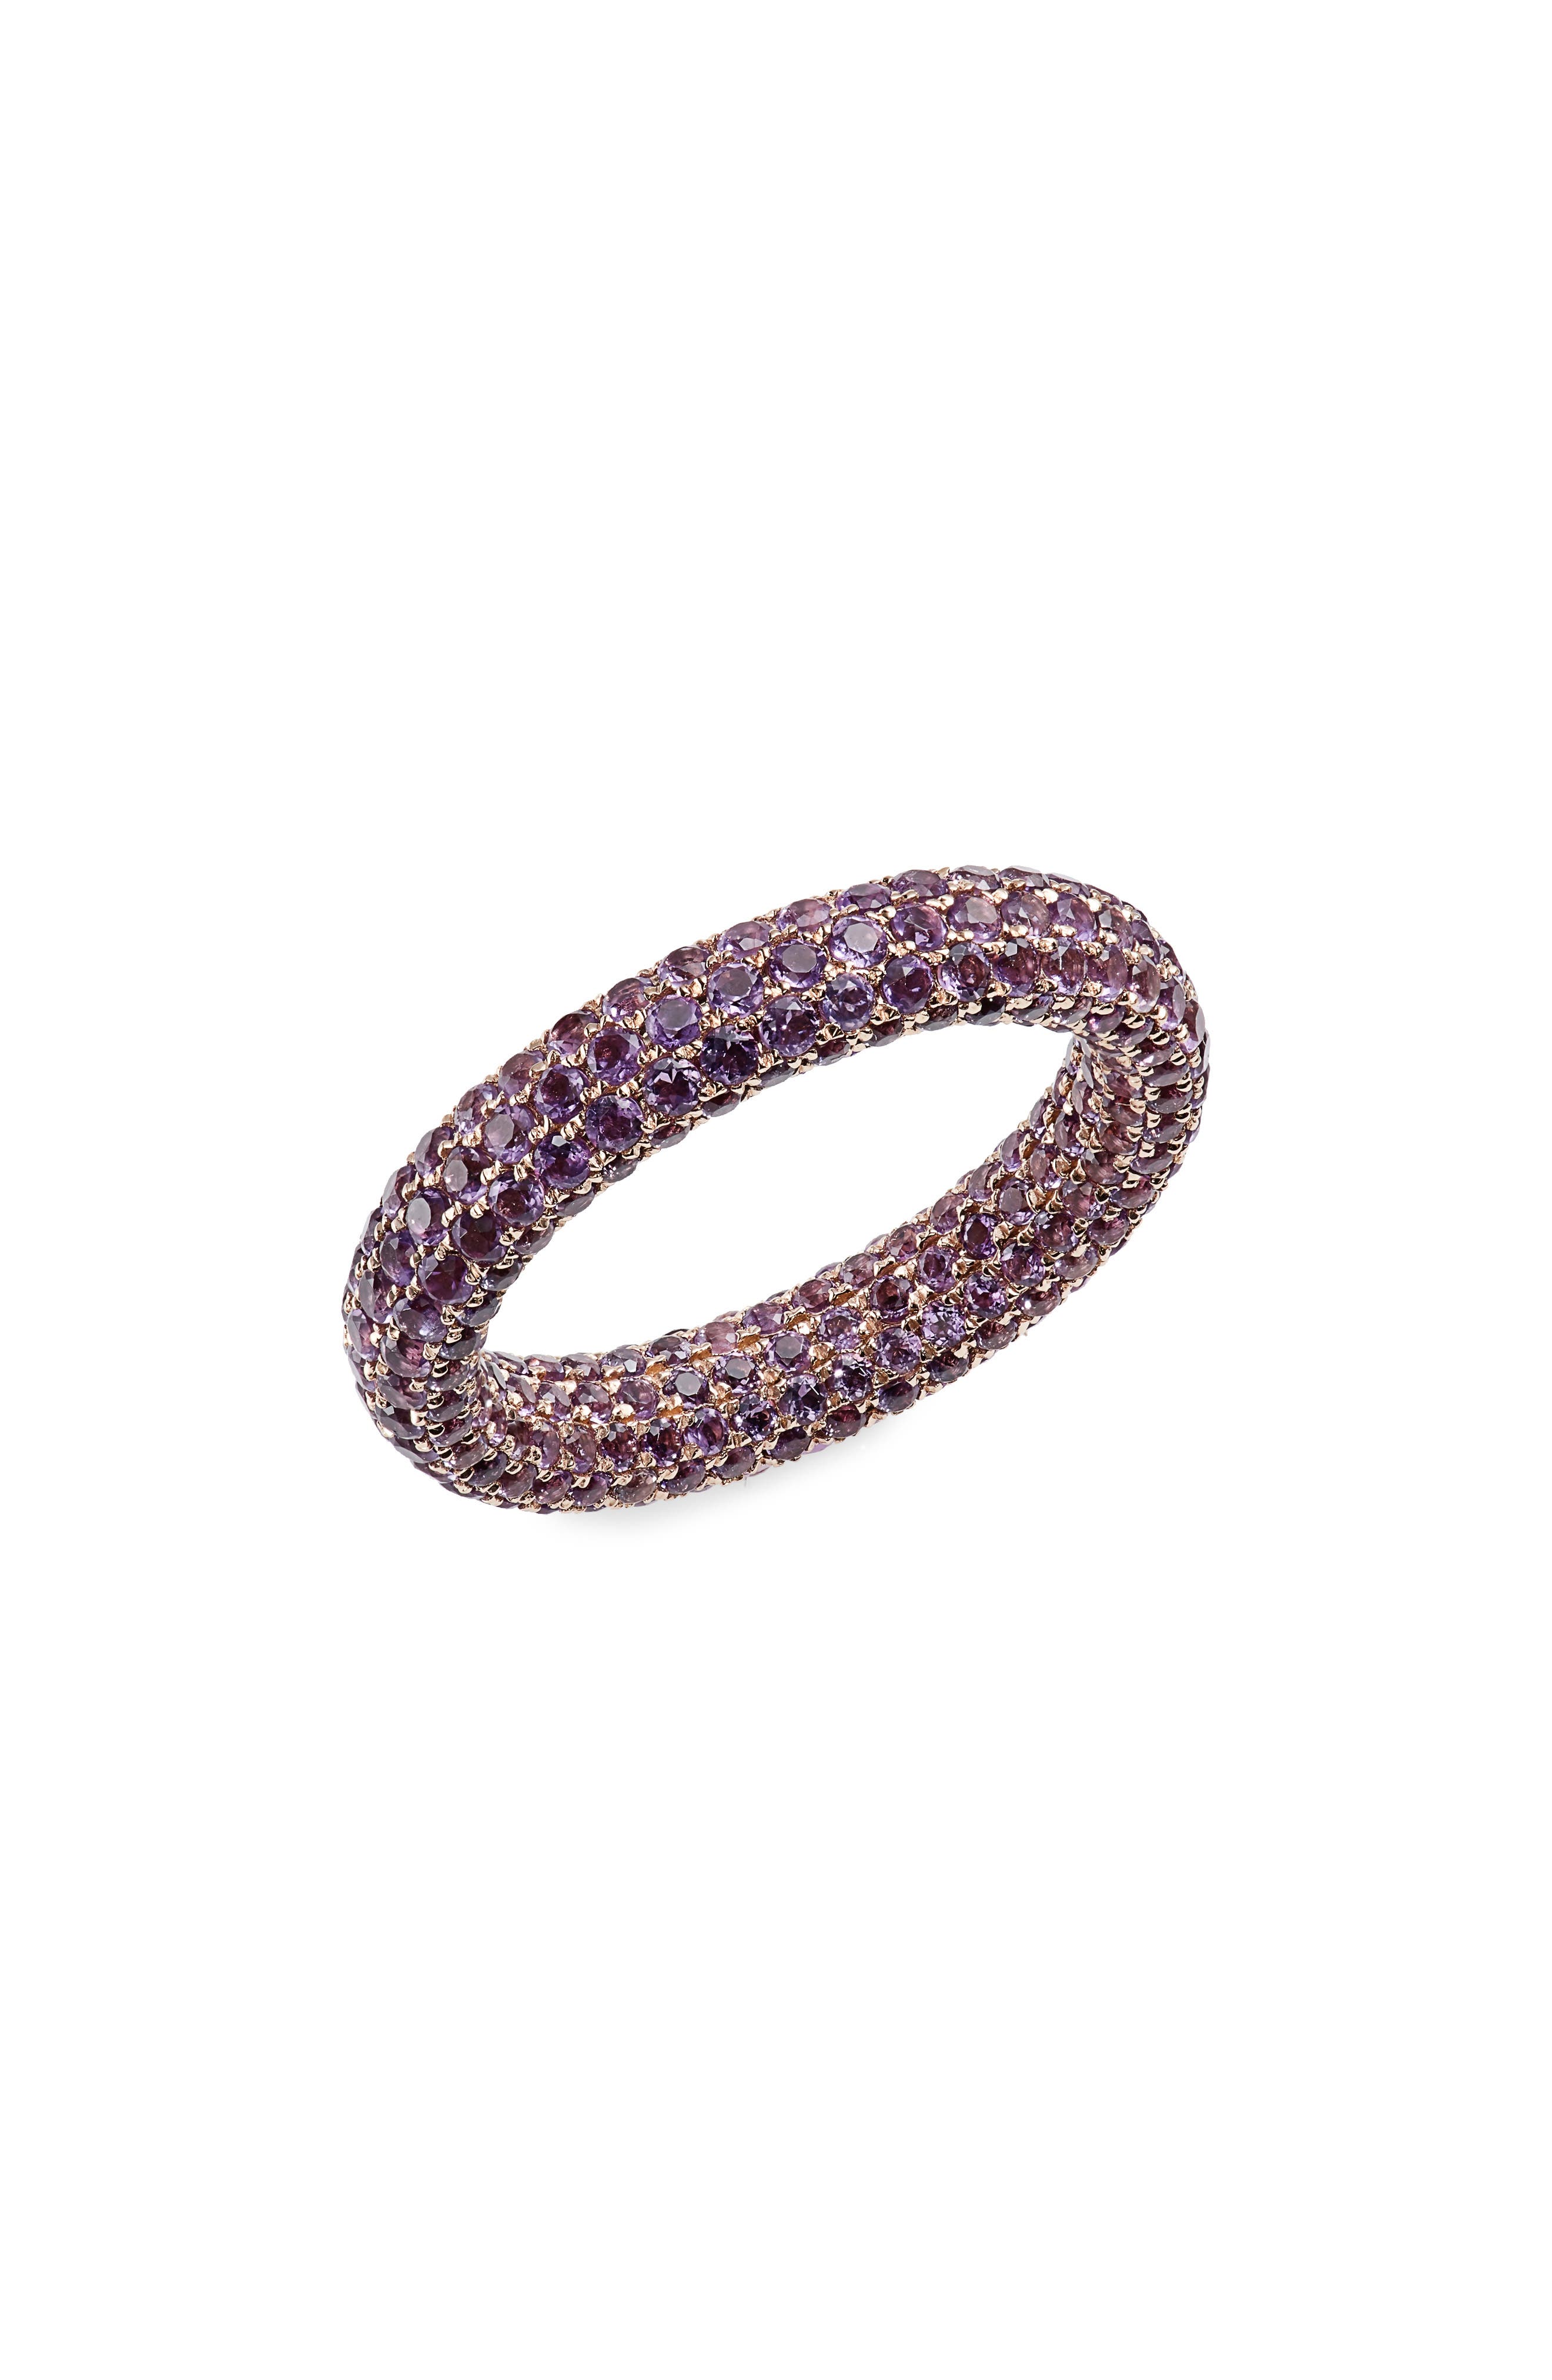 SHAY Amethyst Inside & Out Ring in Black Gold at Nordstrom, Size 7 Us